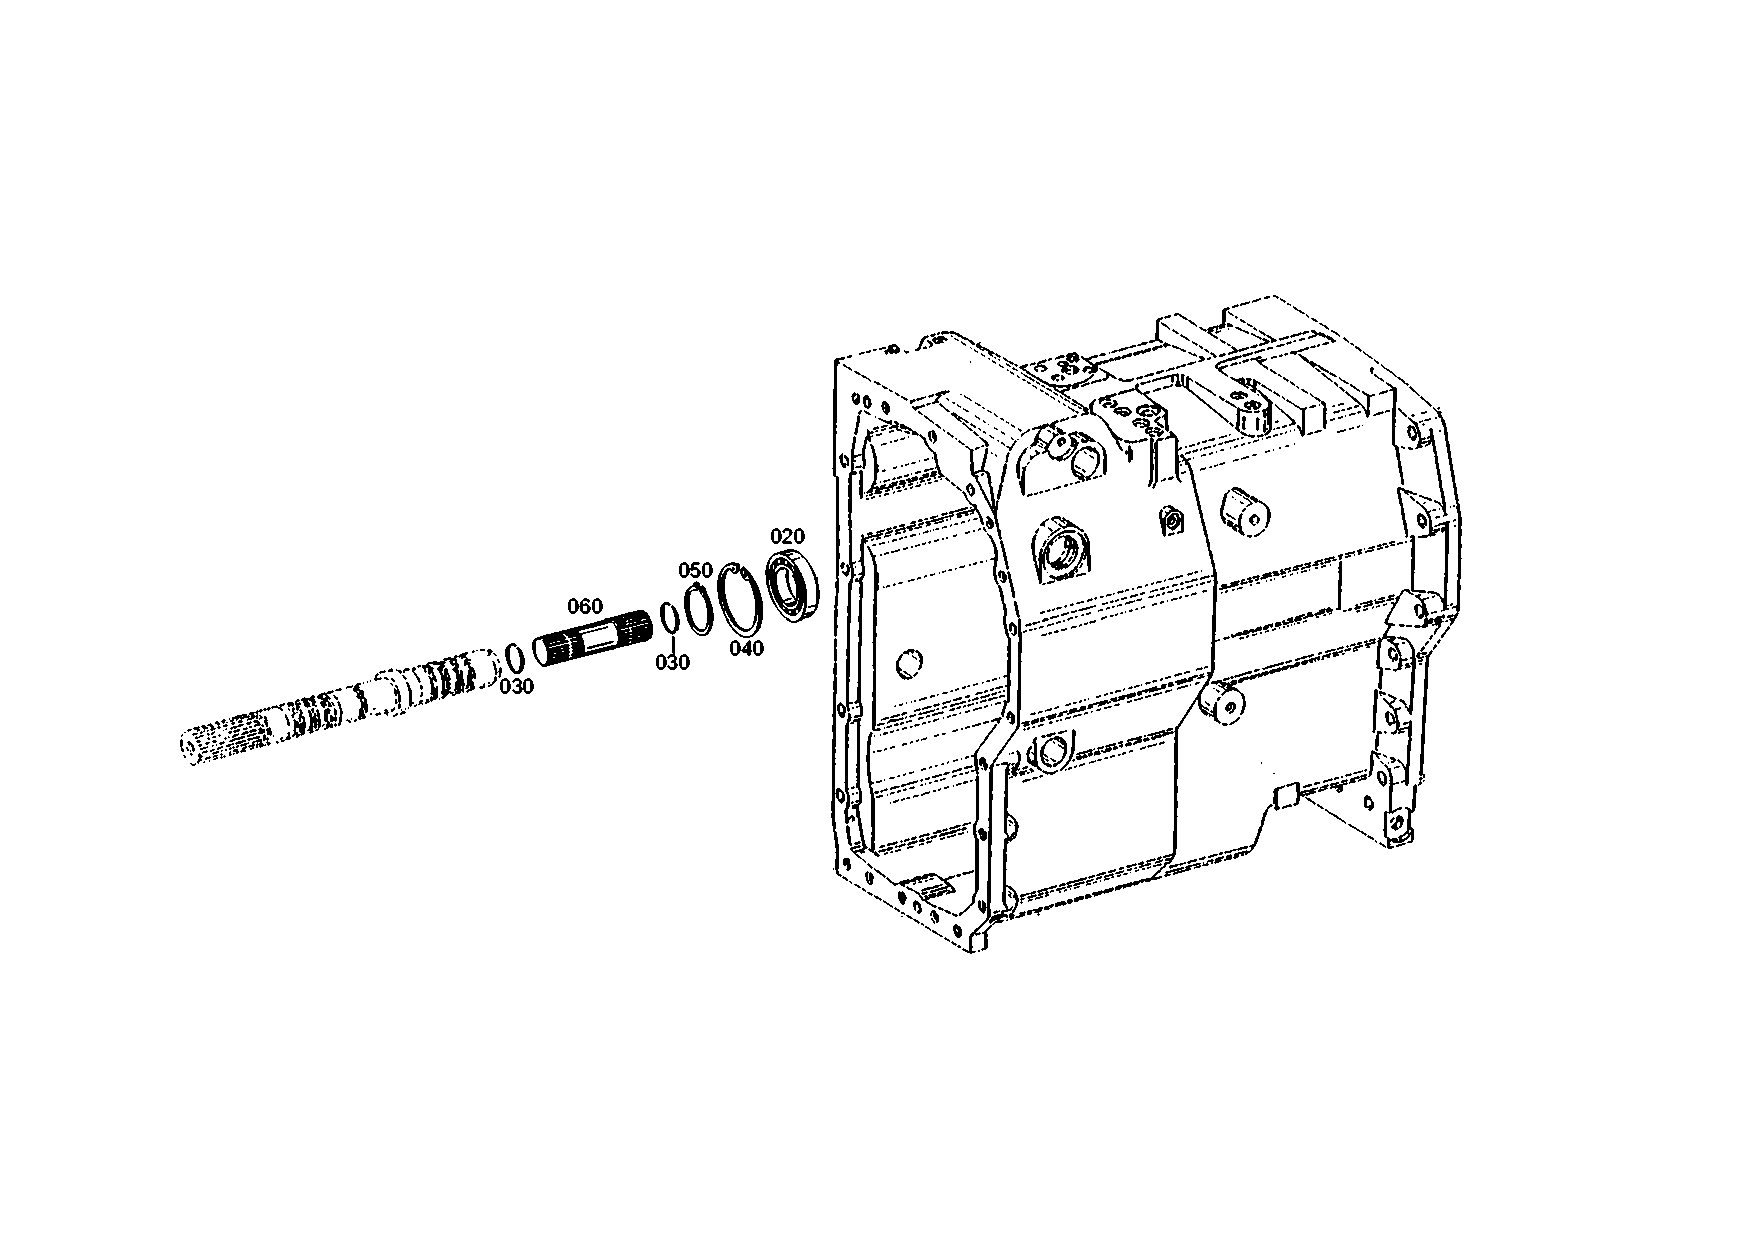 drawing for SENNEBOGEN HYDRAULIKBAGGER GMBH 007889 - SNAP RING (figure 3)